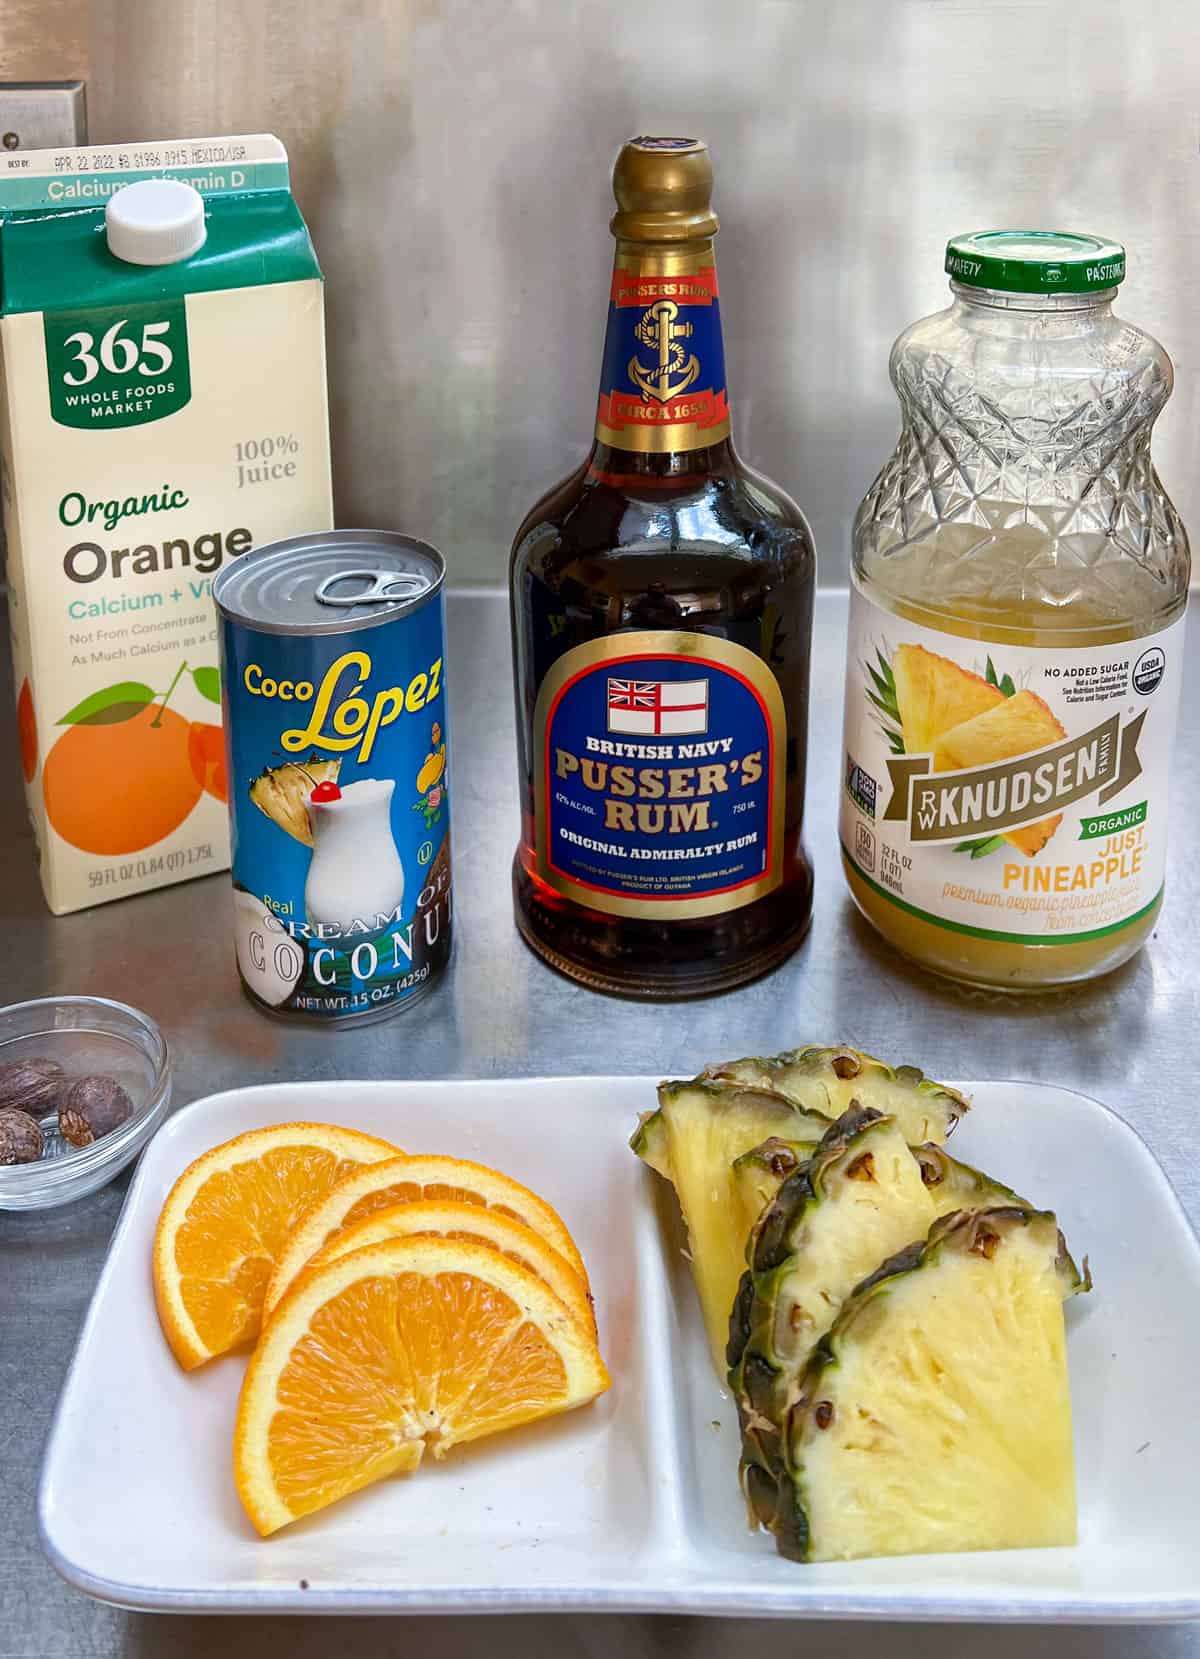 Kitchen counter with a container of orange juice, a bottle of Pusser's rum, a bottle of pineapple juice, a can of coco lopez and, in the foreground a small patter with thin orange slices and triangular pineapple slices